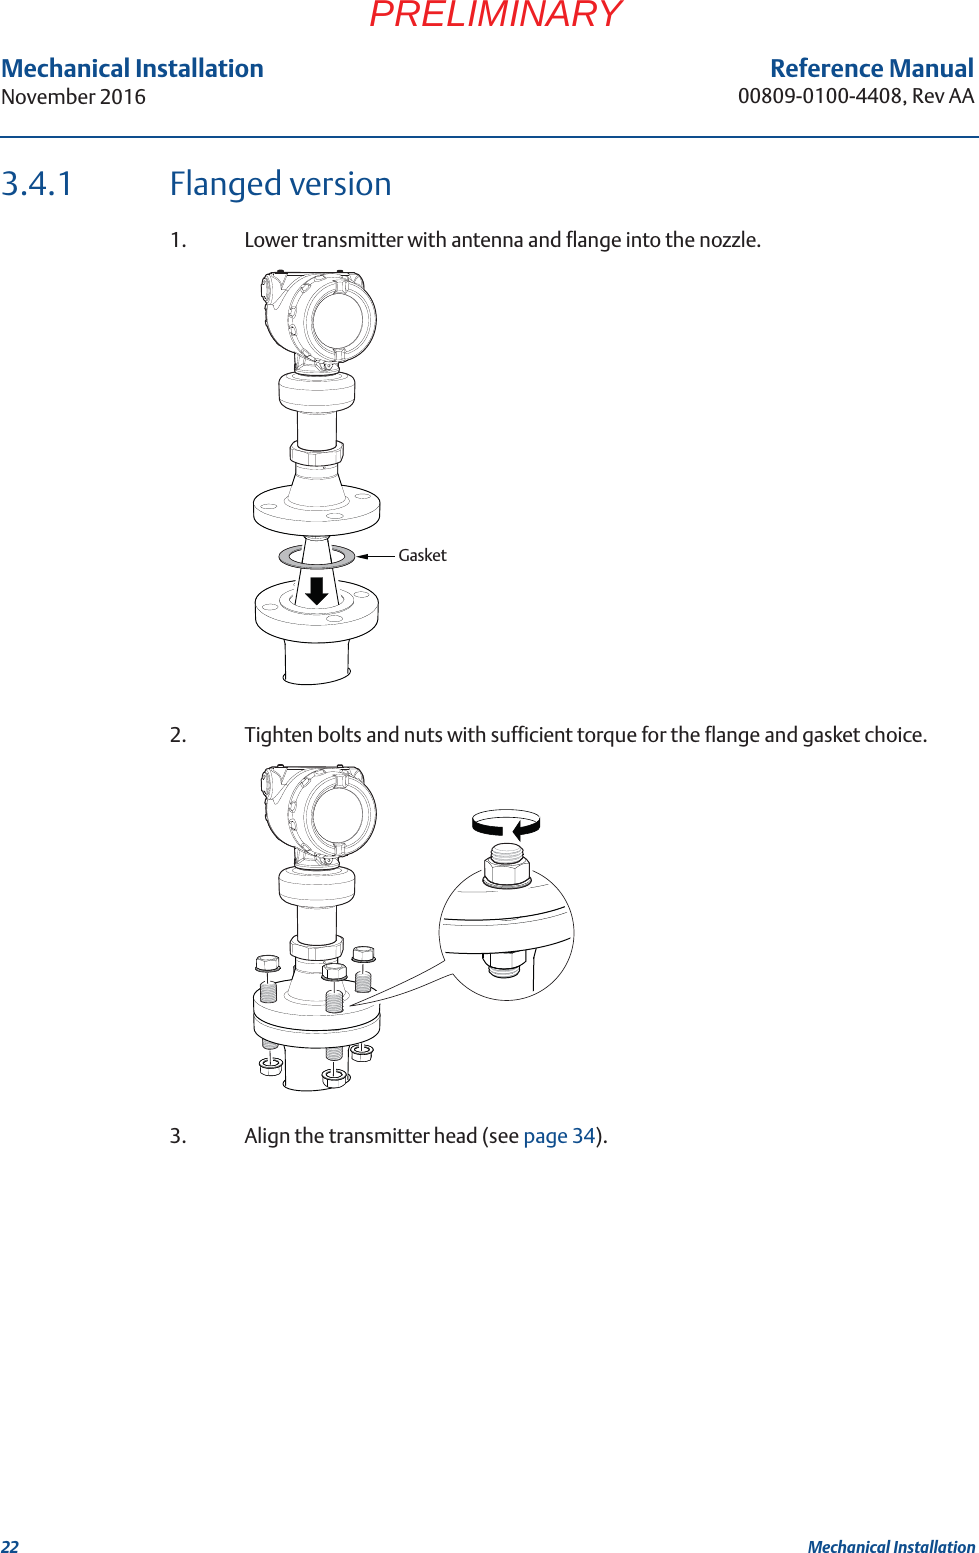 22Reference Manual00809-0100-4408, Rev AAMechanical InstallationNovember 2016Mechanical InstallationPRELIMINARY3.4.1 Flanged version1. Lower transmitter with antenna and flange into the nozzle.2. Tighten bolts and nuts with sufficient torque for the flange and gasket choice.3. Align the transmitter head (see page 34).Gasket